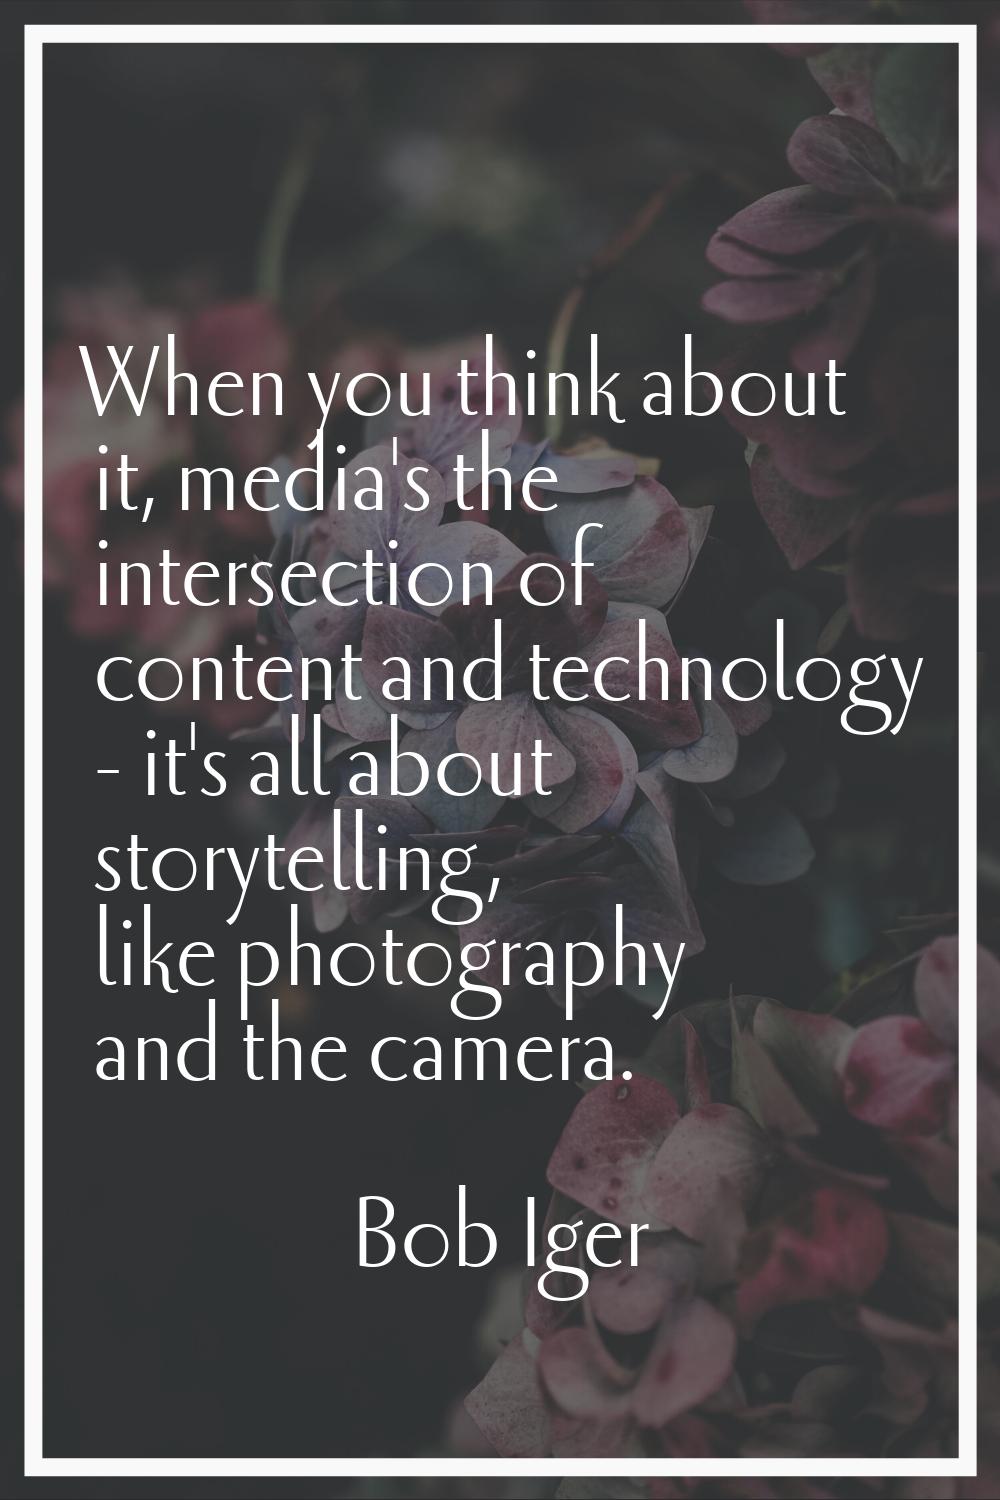 When you think about it, media's the intersection of content and technology - it's all about storyt